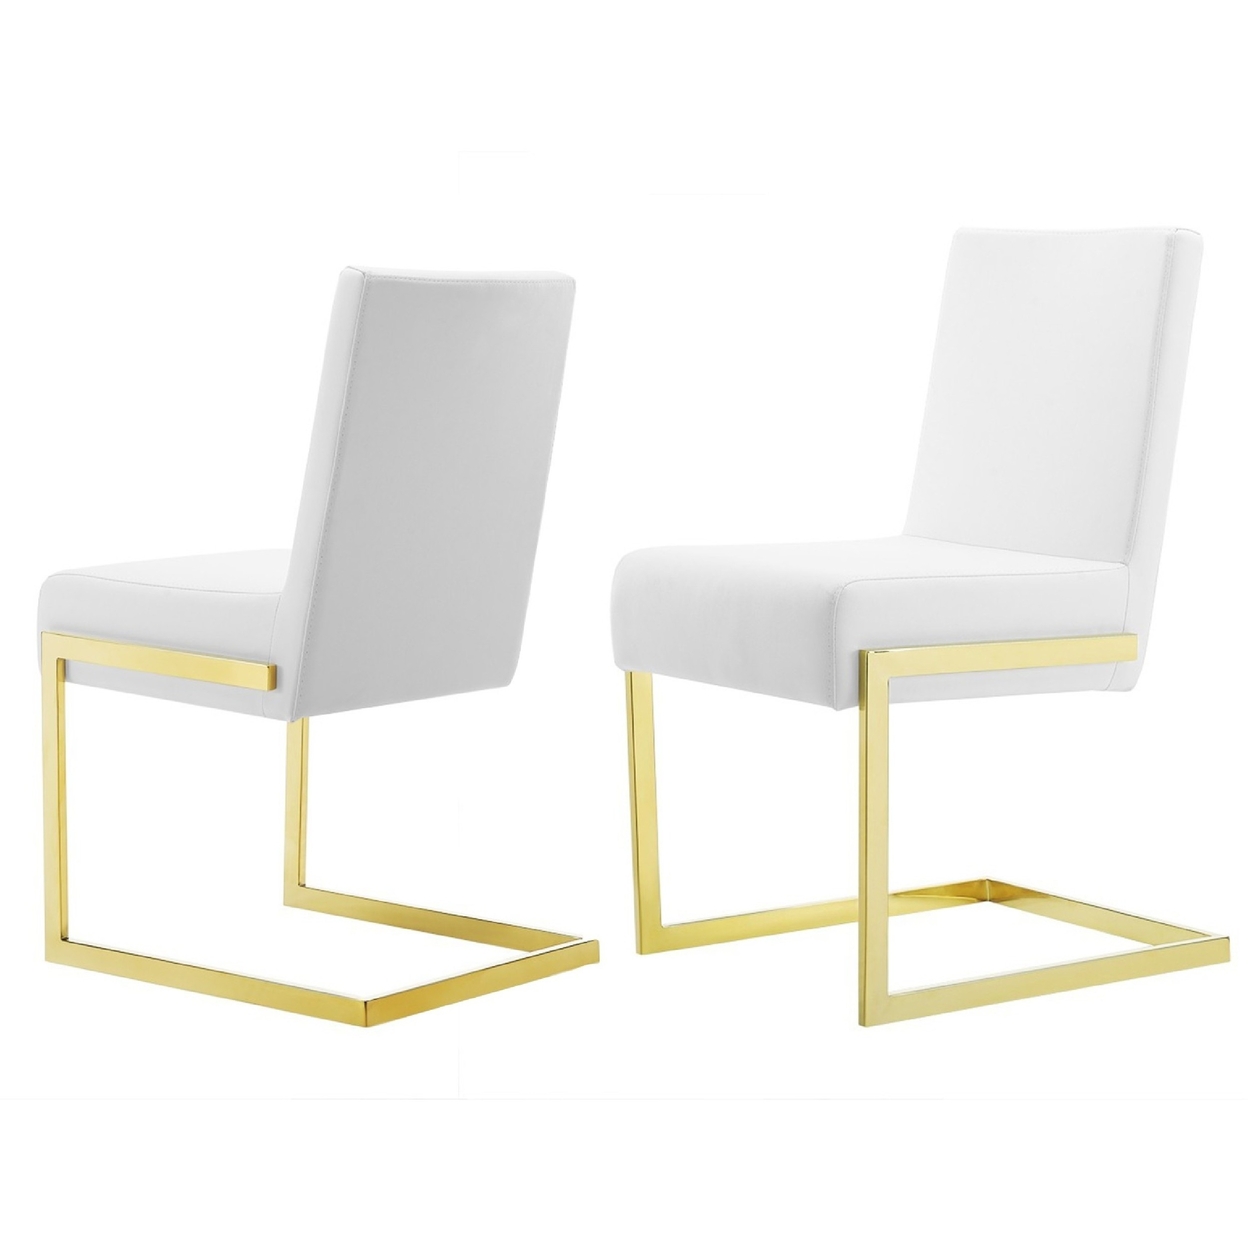 19 Inch Dining Chair, Set Of 2, White Vegan Leather, Gold Cantilever Base- Saltoro Sherpi